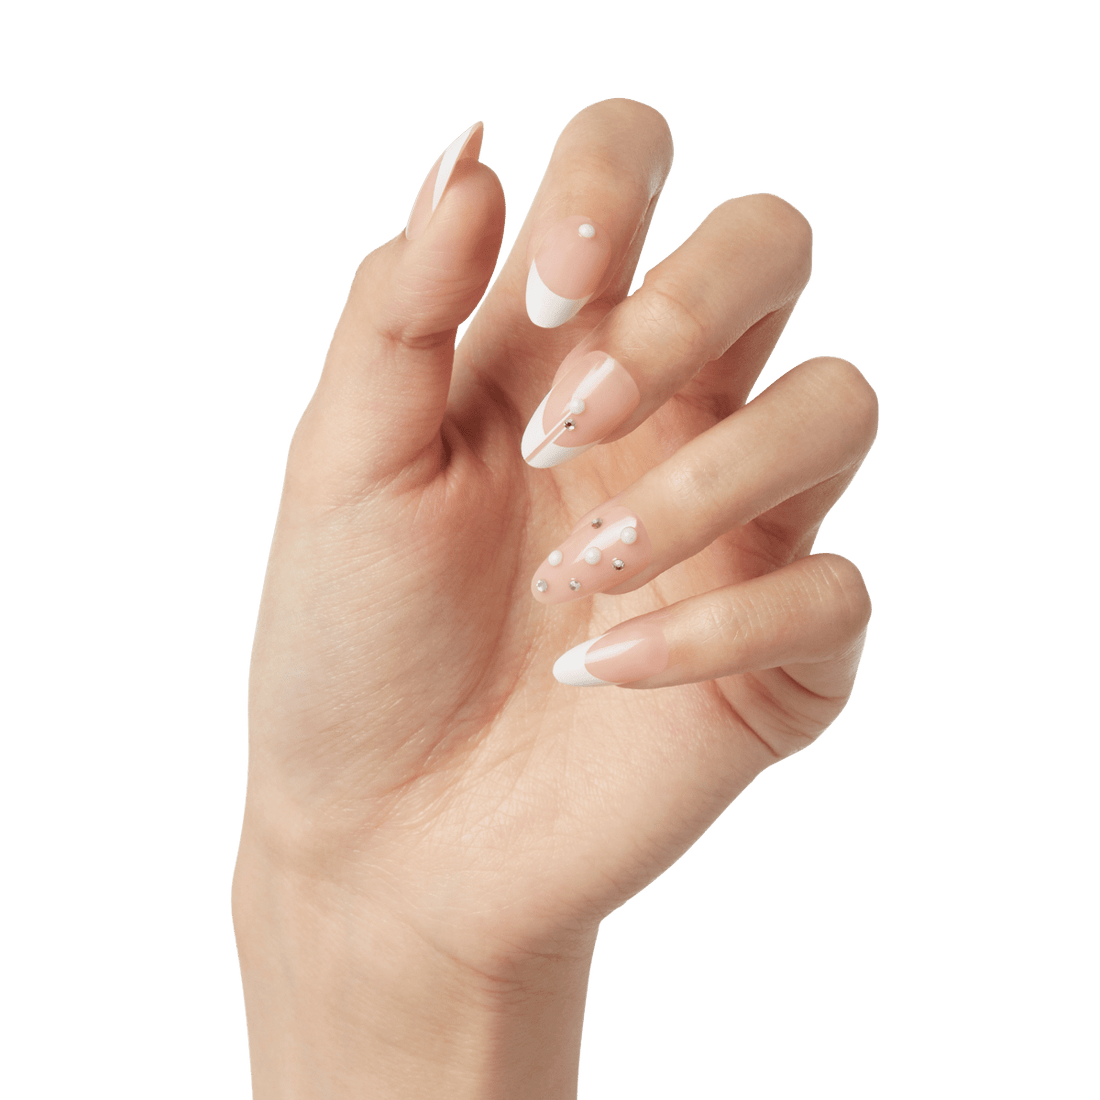 KISS Classy Nails Premium, Press-On Nails, Highlights, White, Med Almond, 30ct